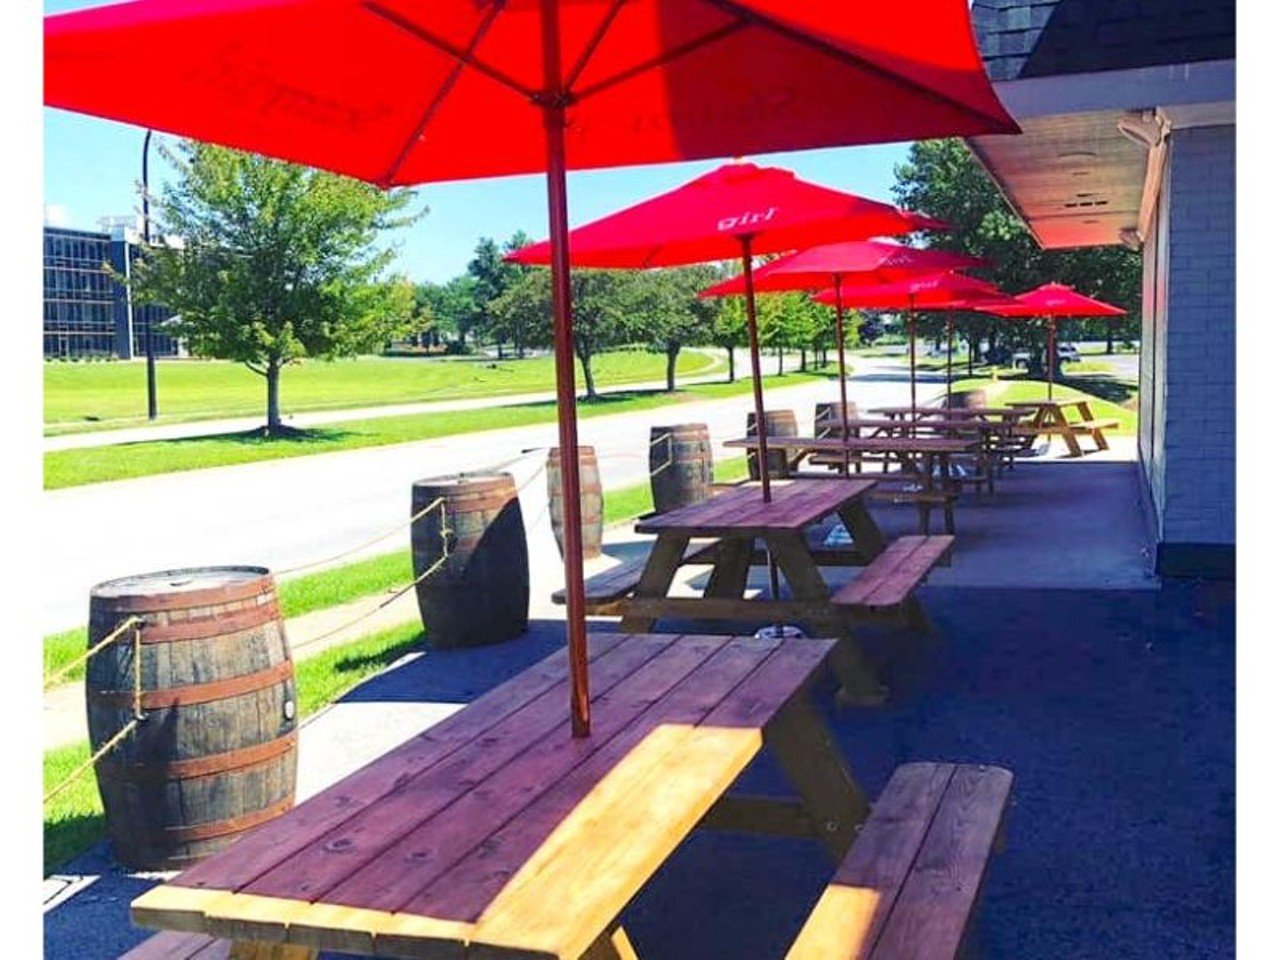 Cask Southern Kitchen and Bar
9980 Linn Station Rd. 
The name should be a hint. Bourbon, rich Southern food, and a nice patio for relaxing. Photo via  Cask Southern Kitchen and Bar 